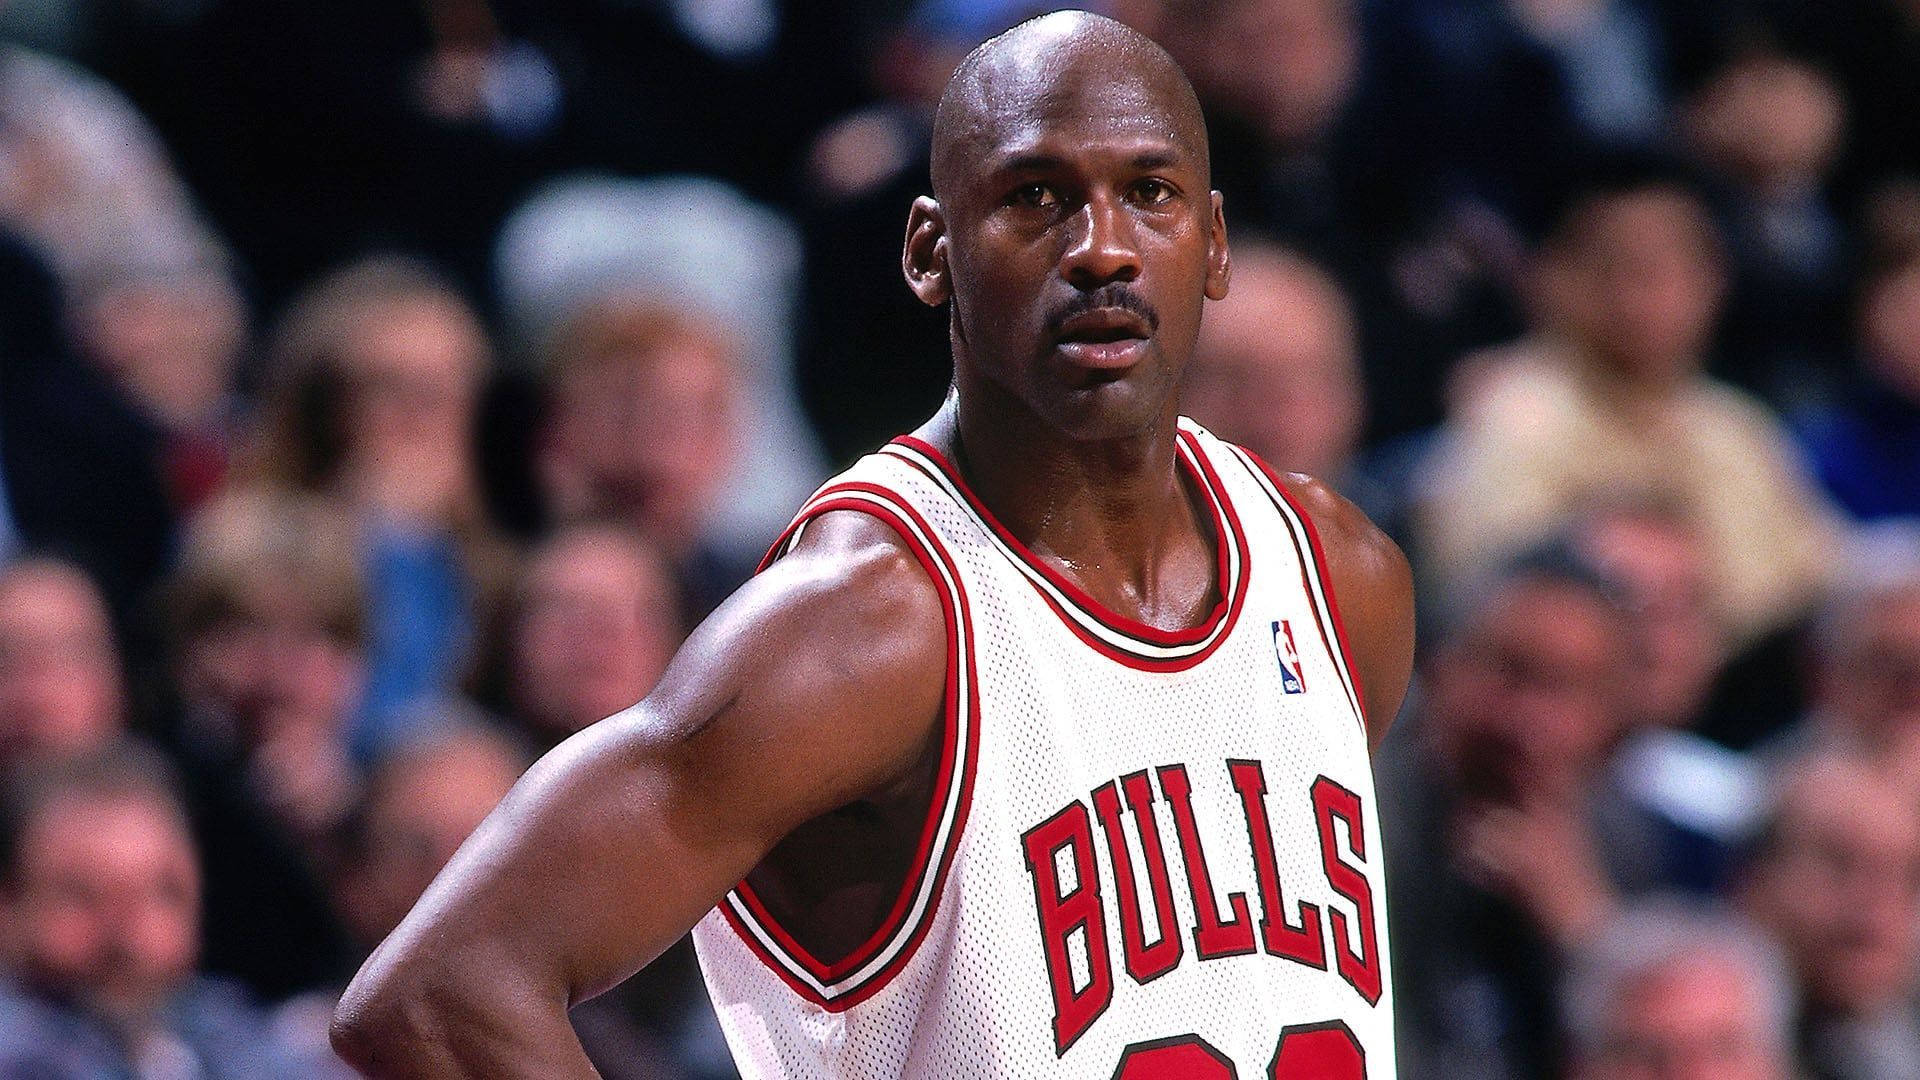 The story of the former Milwaukee Buck that became the richest NBA